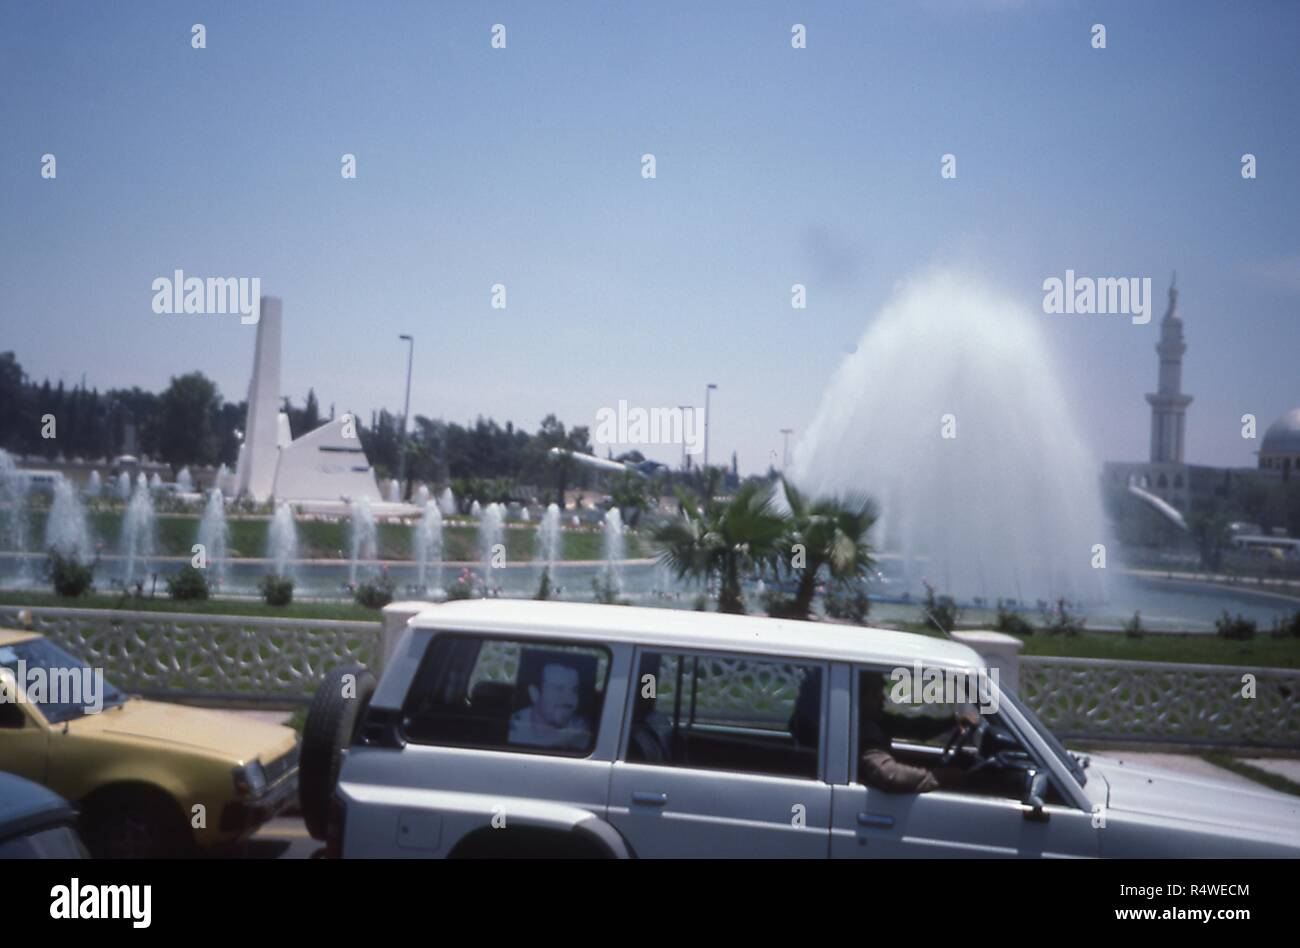 View from a vehicle in traffic driving through Damascus, Syria, June 1994. The rear window of a car in the next lane has a memorial poster of Bassel al-Assad, eldest son of President Hafez al-Assad, who died in January 1994. () Stock Photo